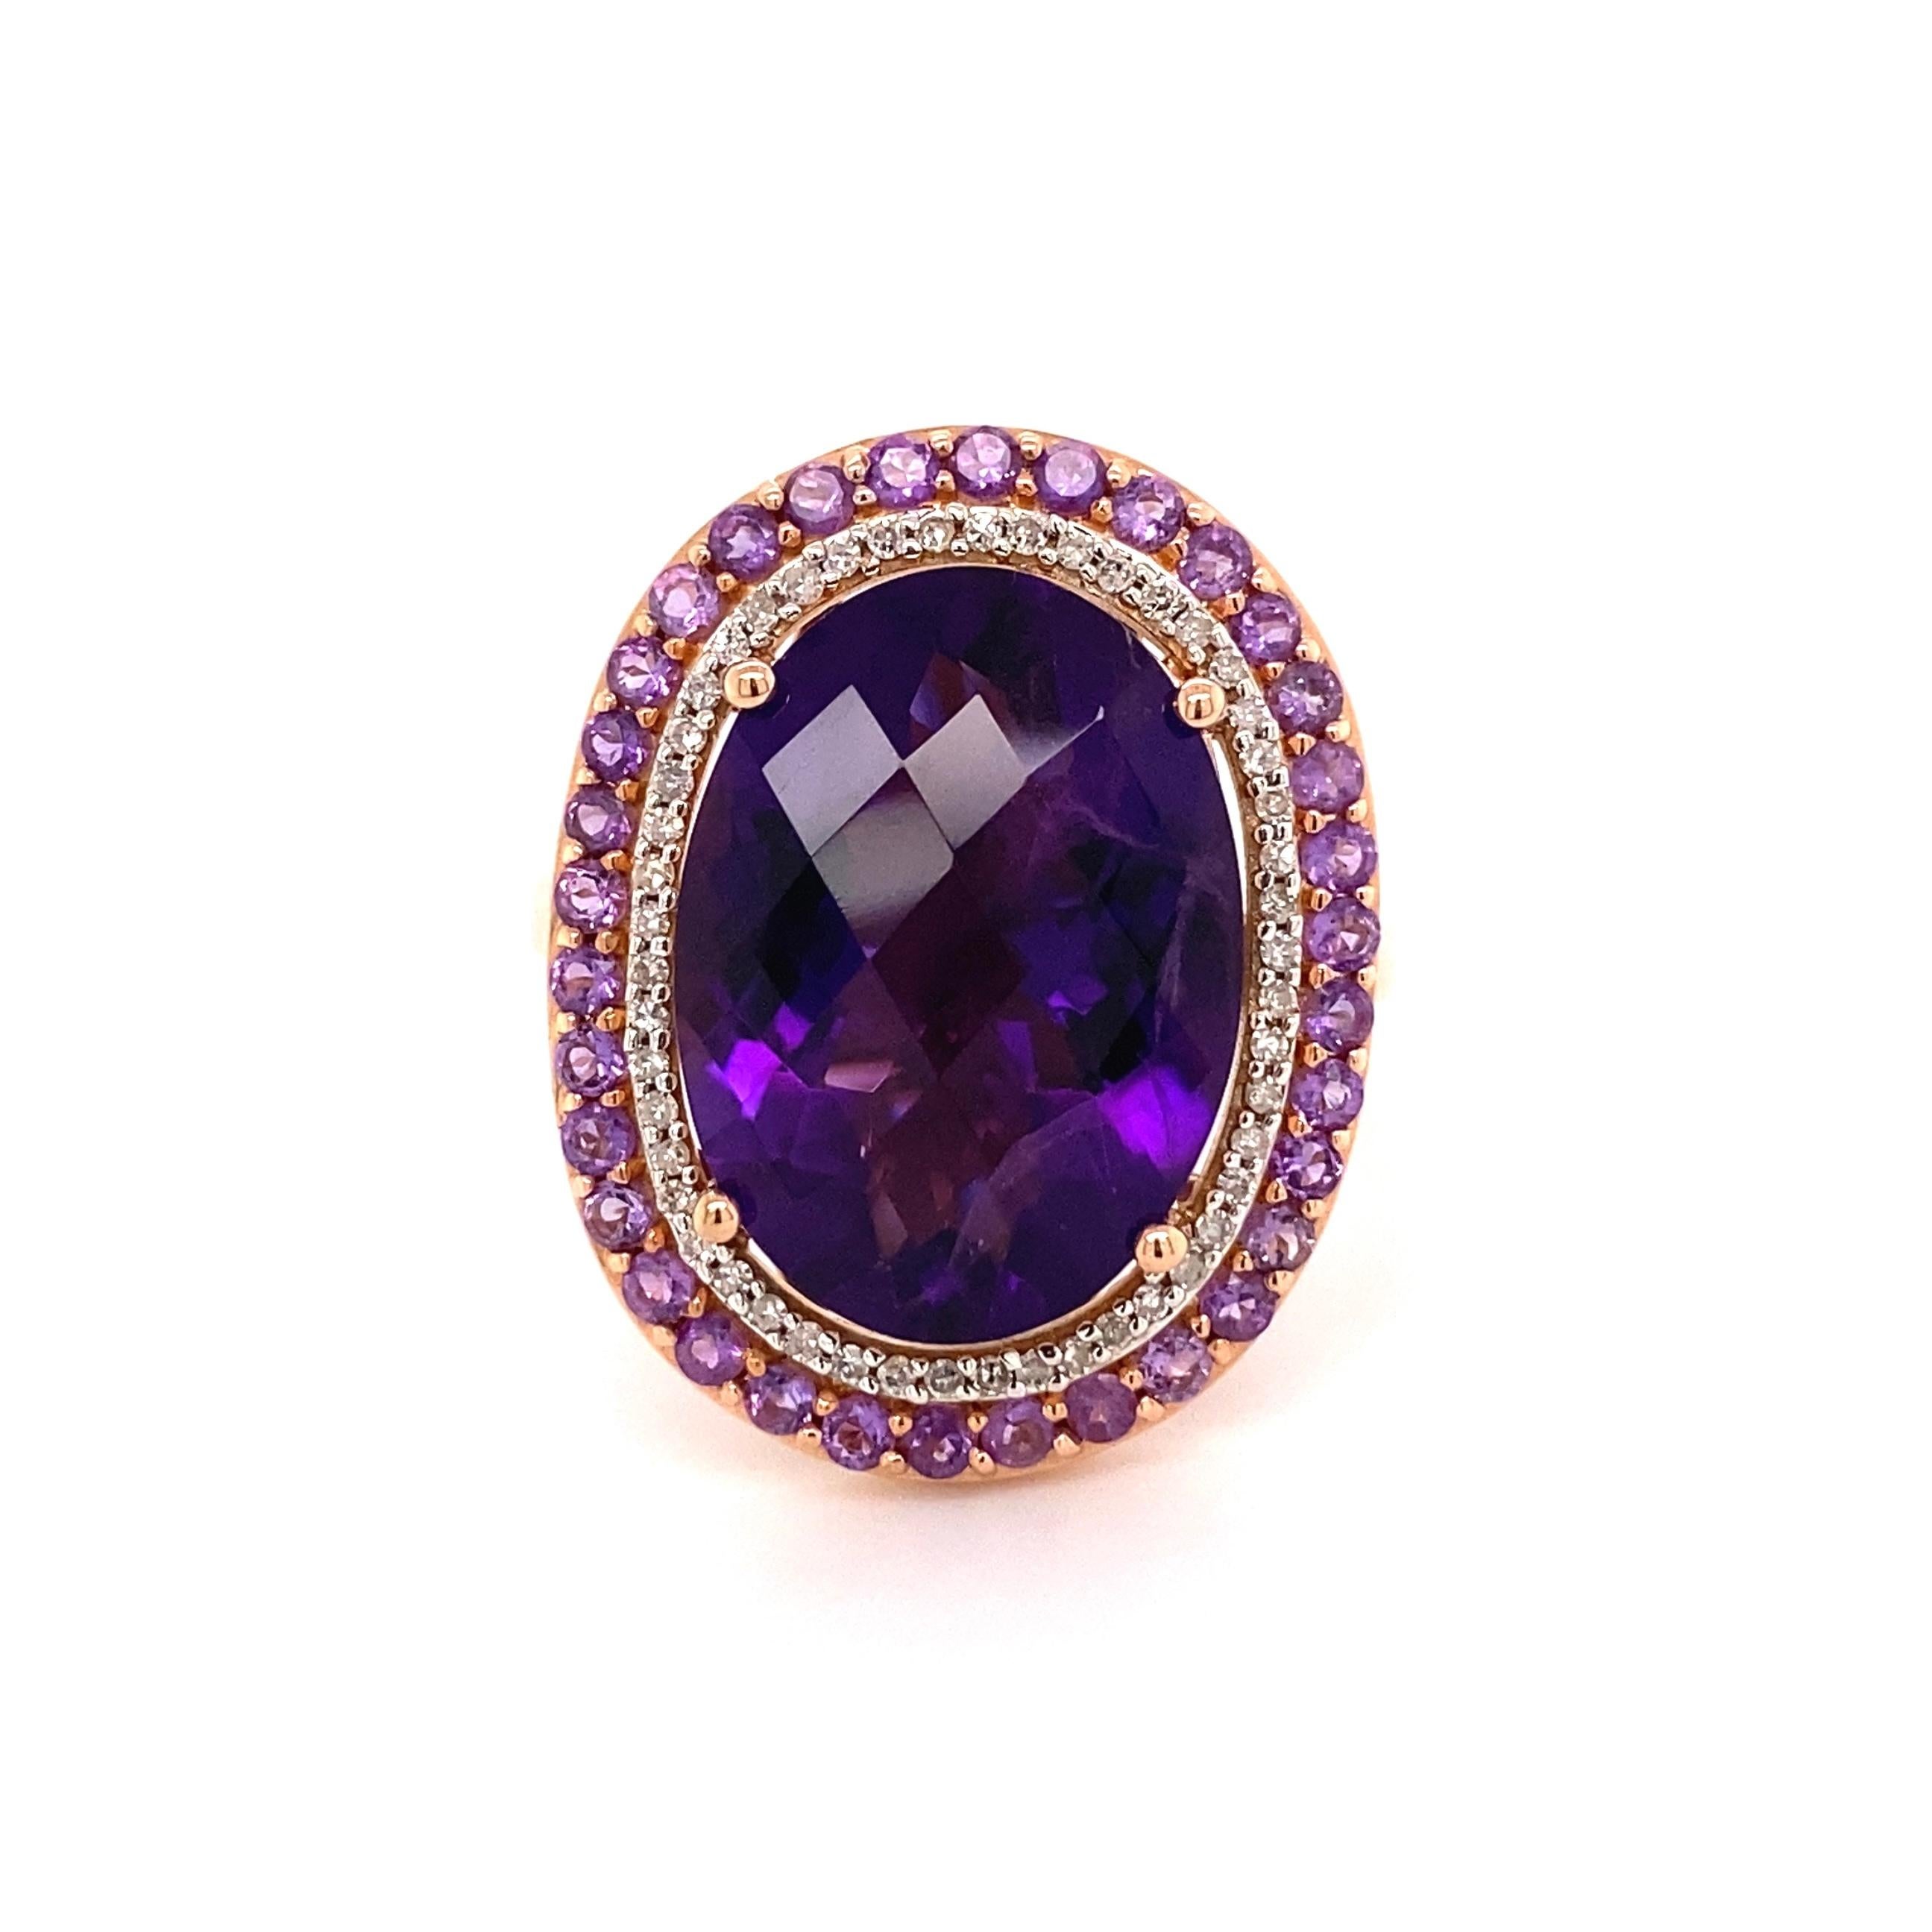 Women's Awesome Large Oval Amethyst and Diamond Cocktail Ring Estate Fine Jewelry For Sale